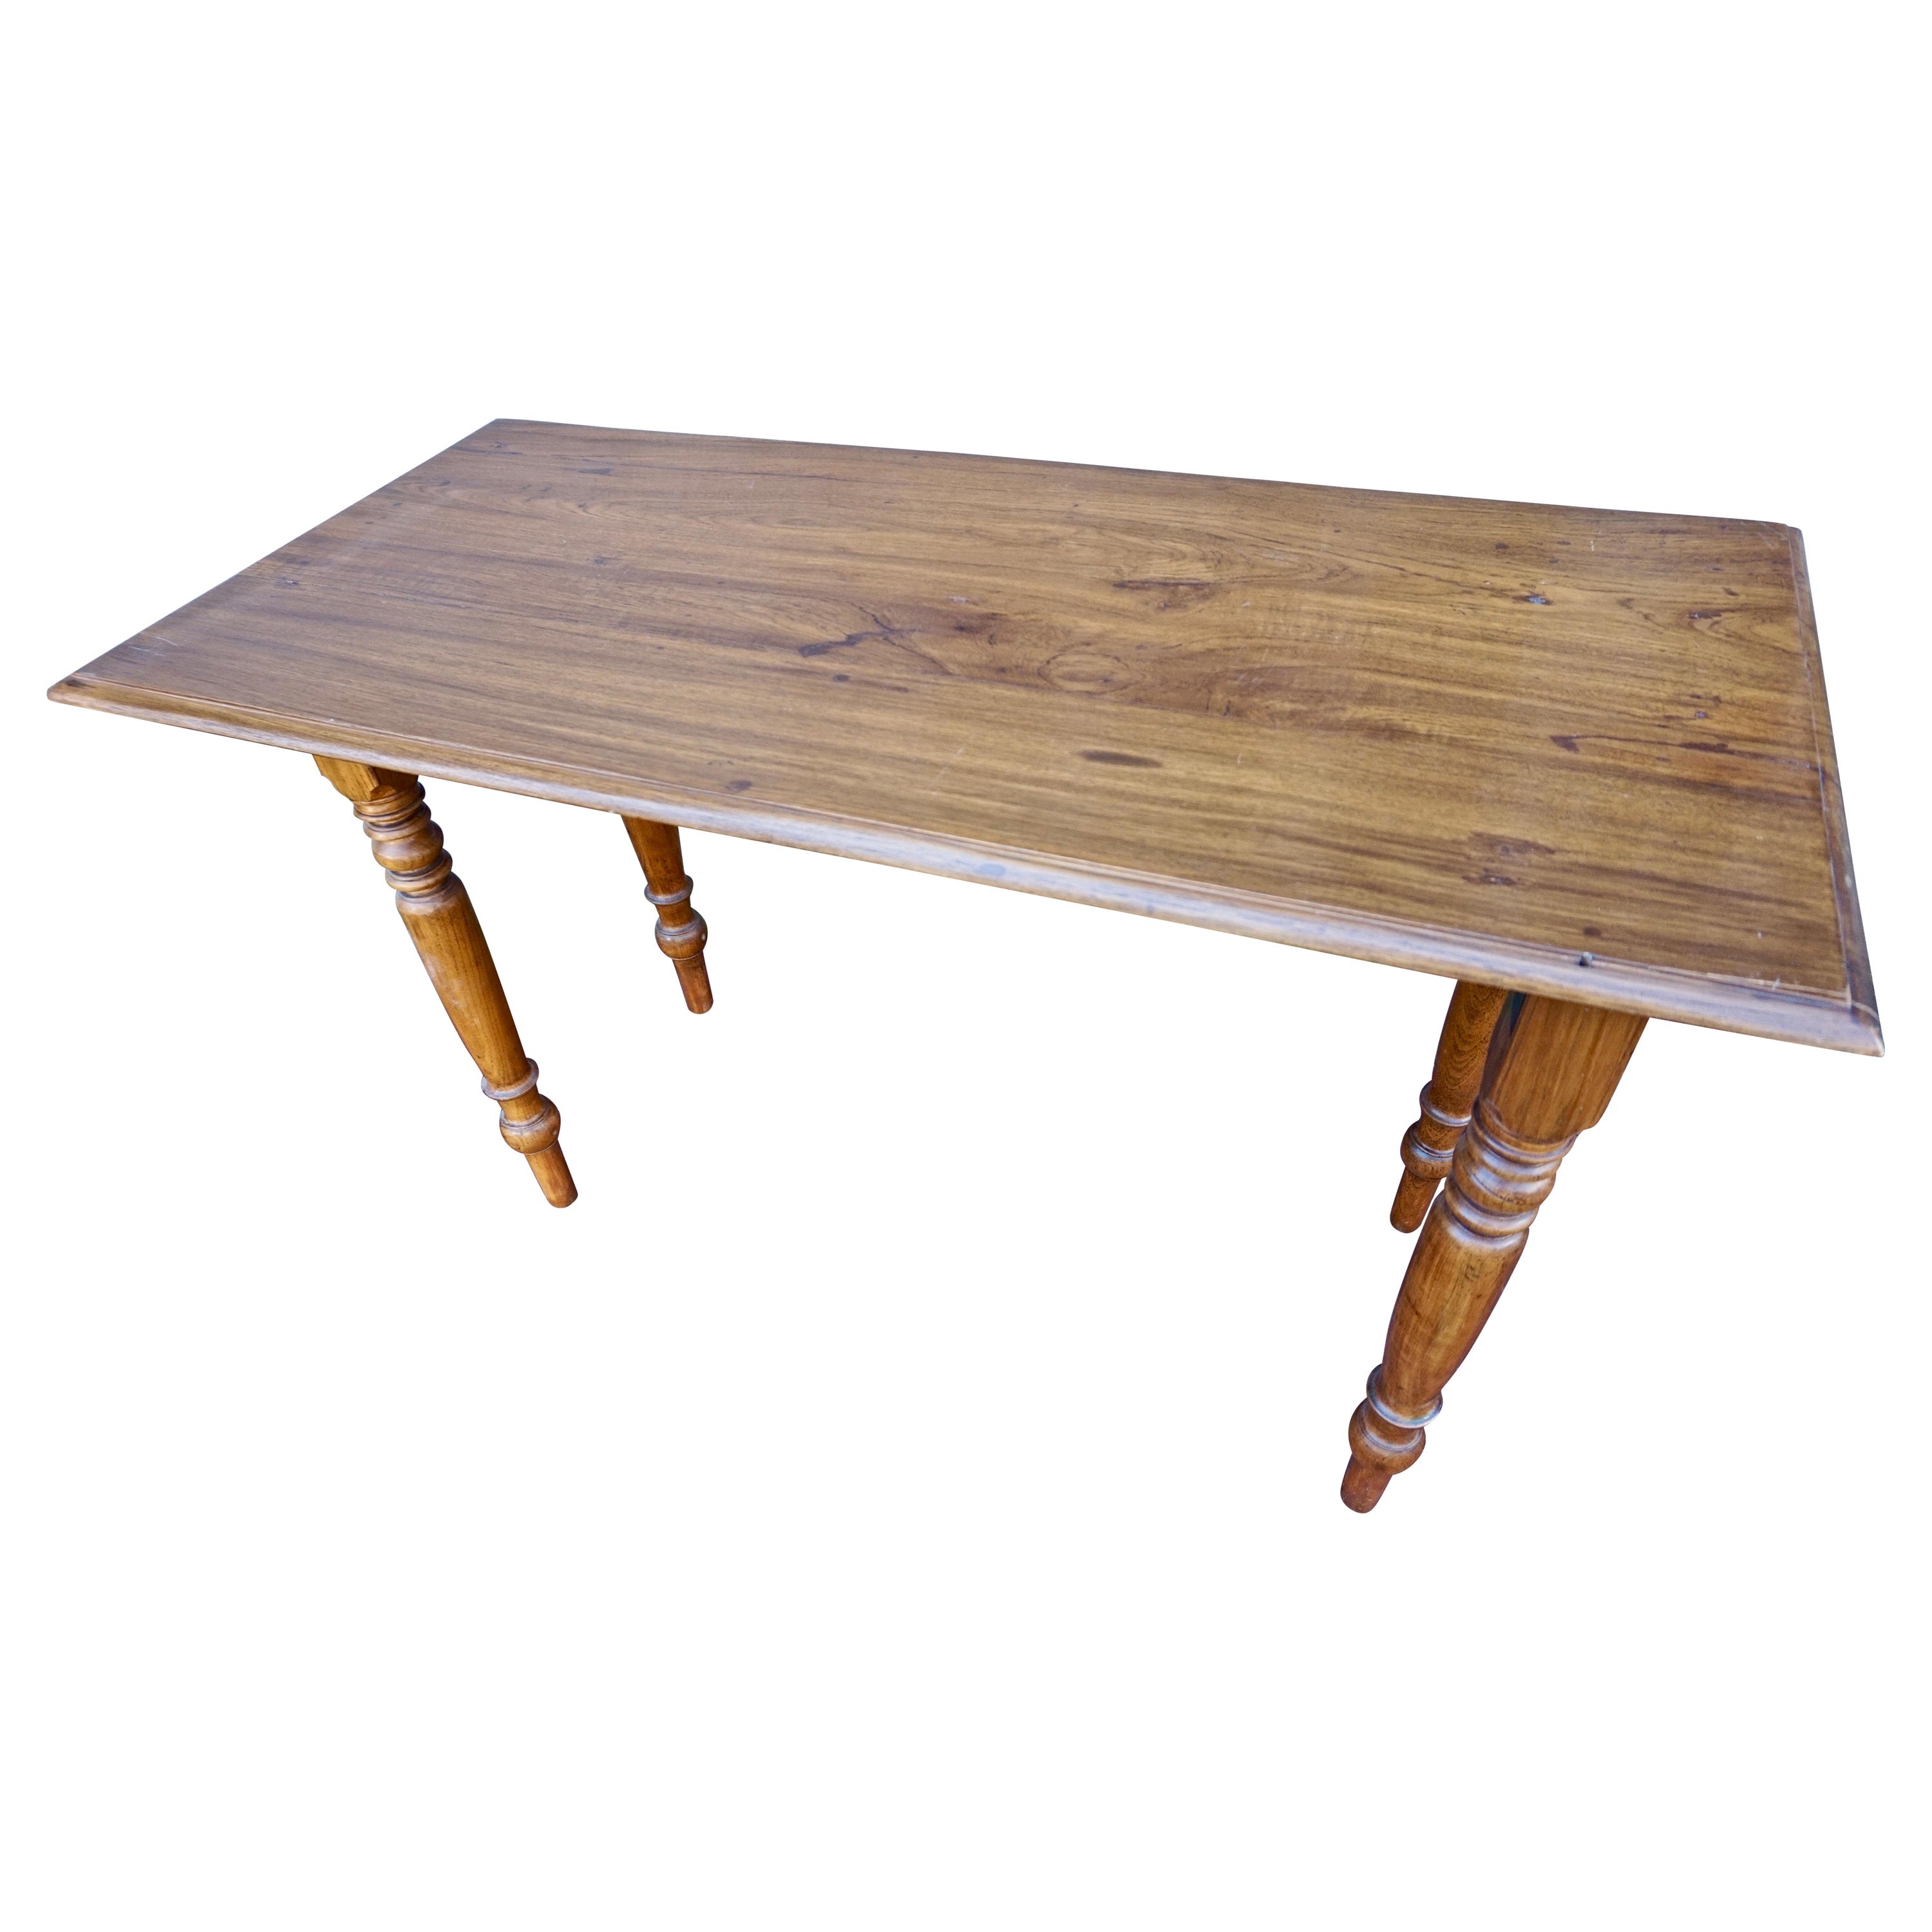 Circa 1890's

Solid teak hand crafted Campaign folding table from the days of the British Raj. Has flaps that pivot outwards and tuck away beneath as demonstrated. Overall good condition. Hinges seem old but re-enforcing steel plates and newer